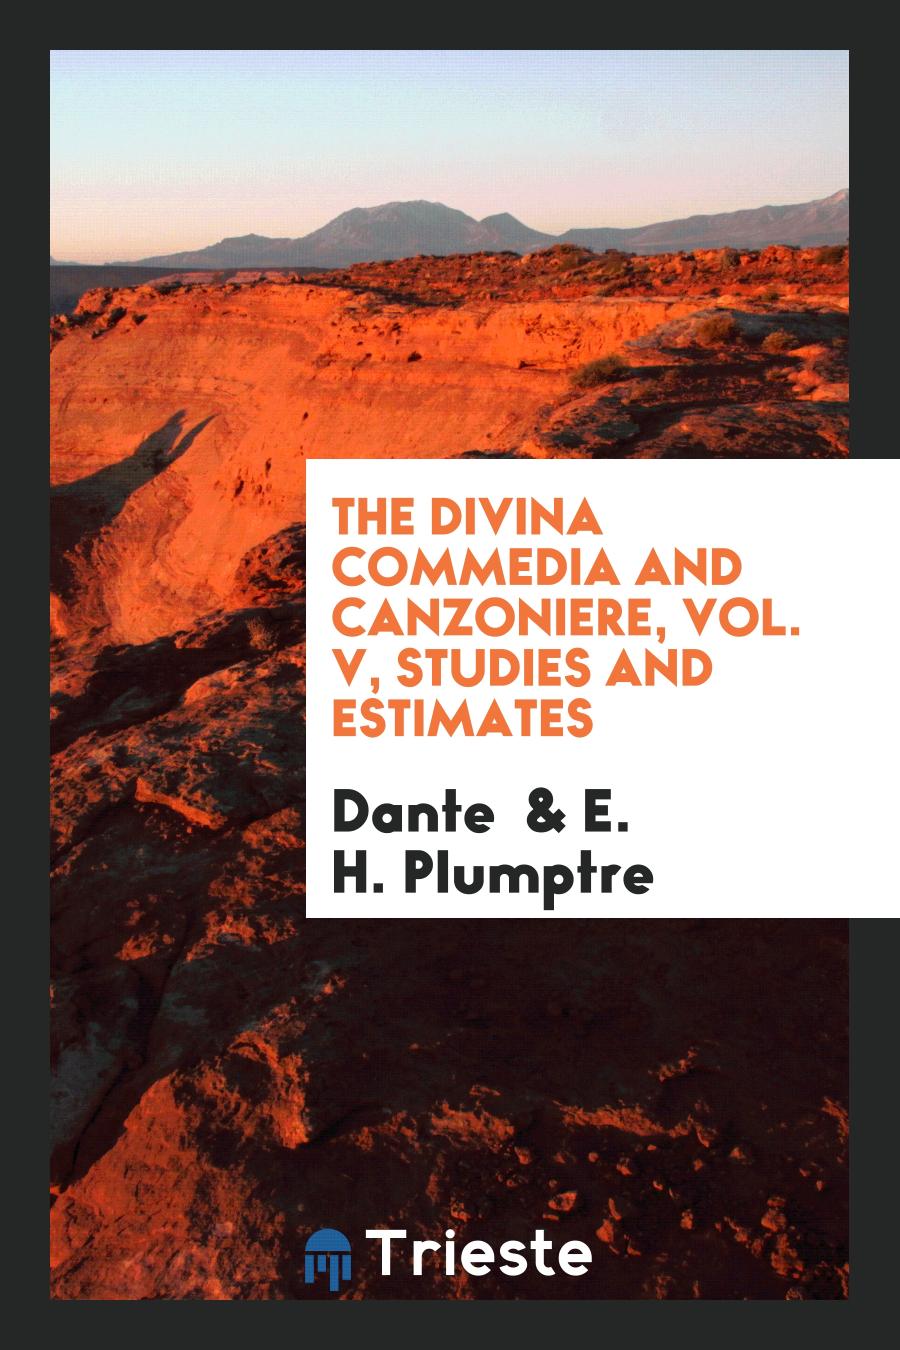 The Divina commedia and Canzoniere, Vol. V, Studies and estimates